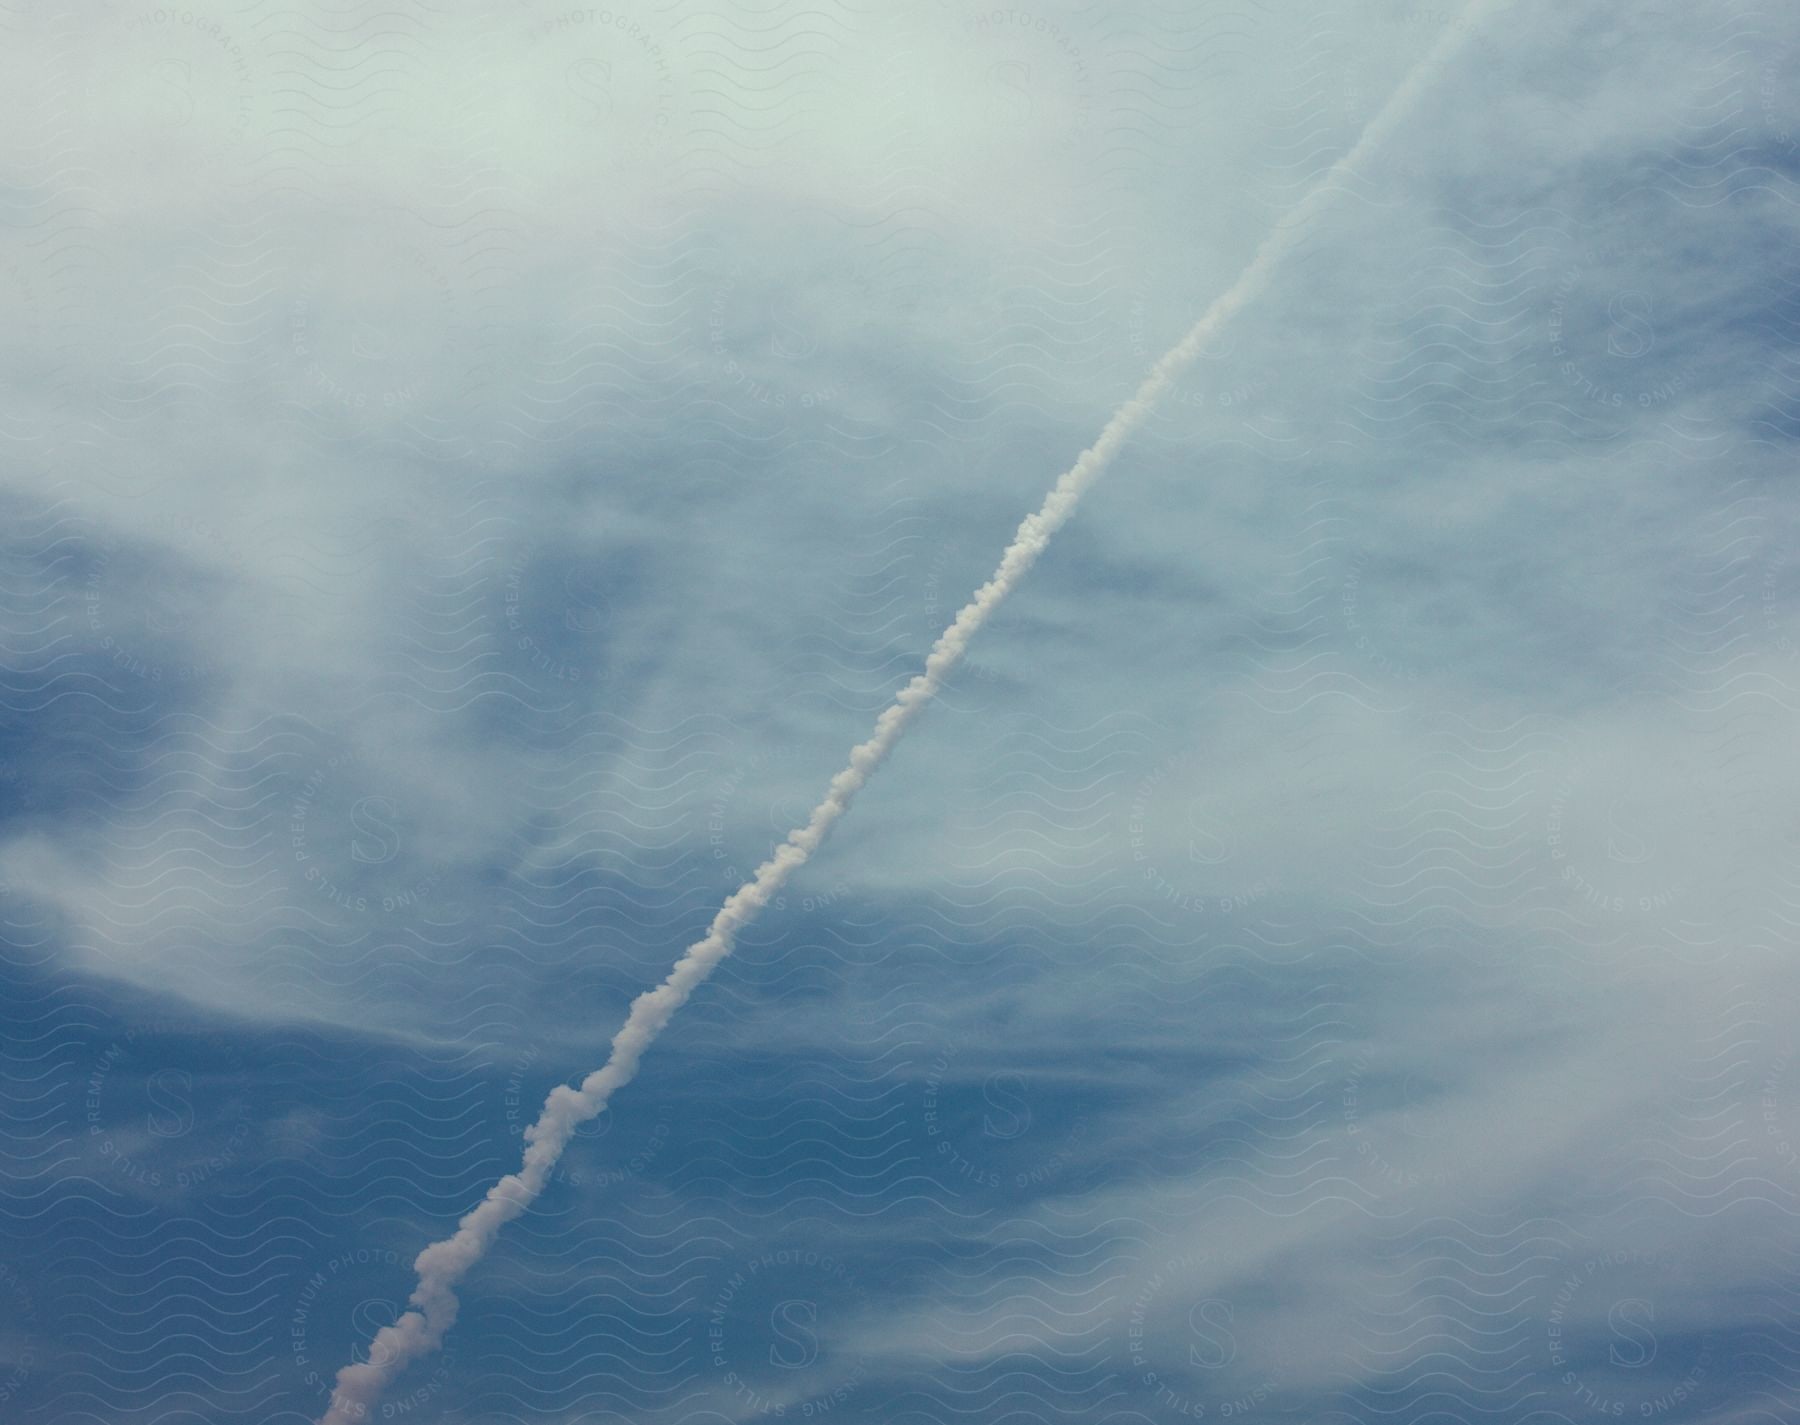 Rocket taking off with a trail against a blue cloudy sky